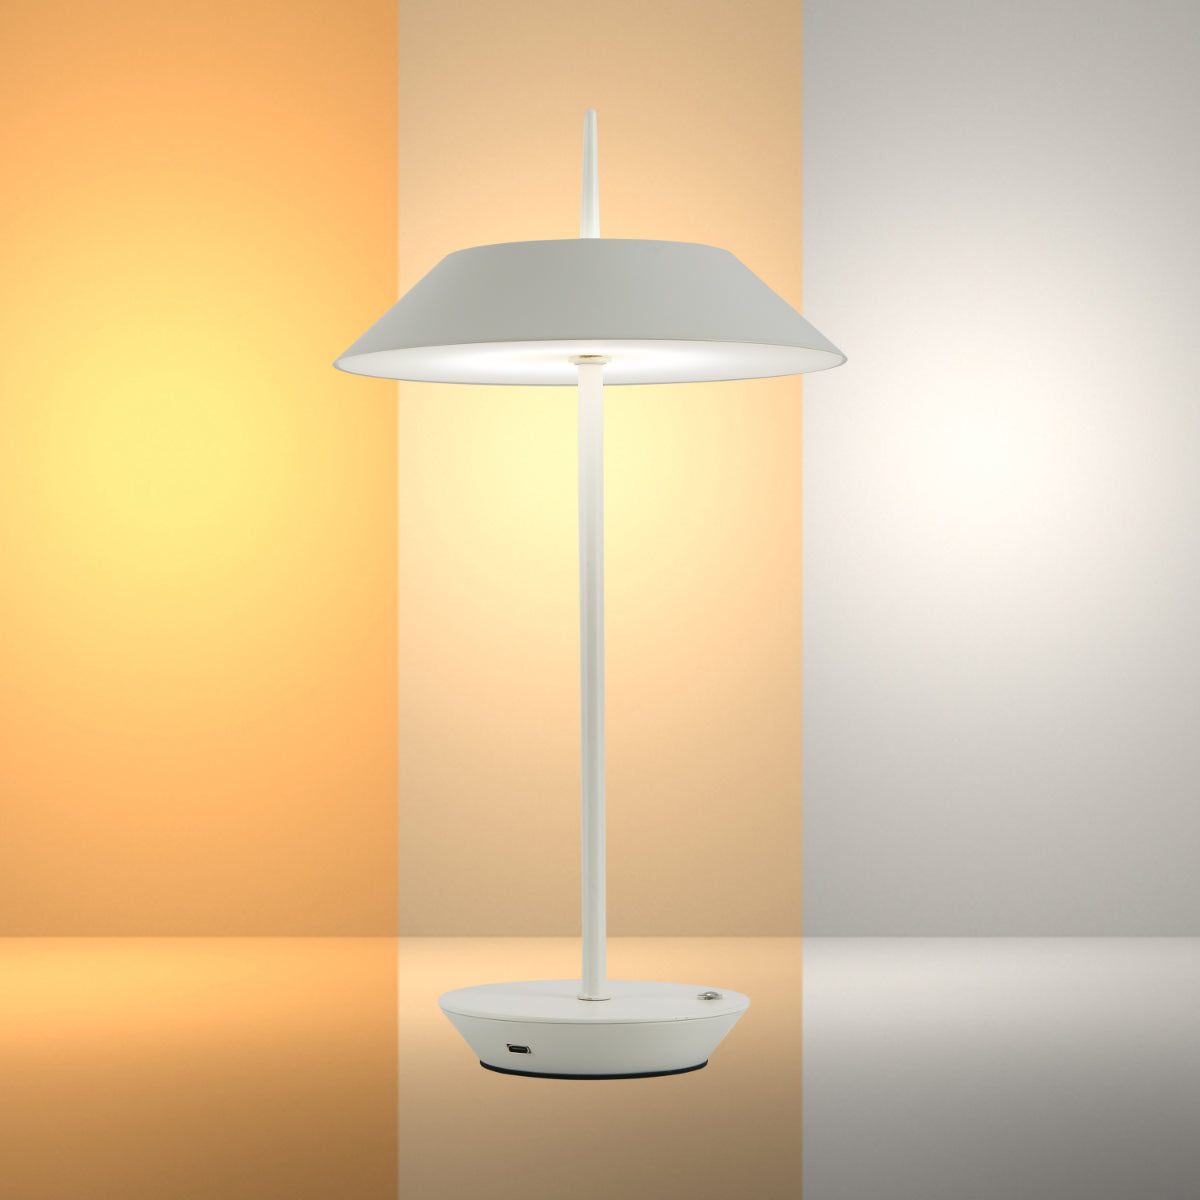 Main image of Eclipse Touch Table Lamp 130-03690